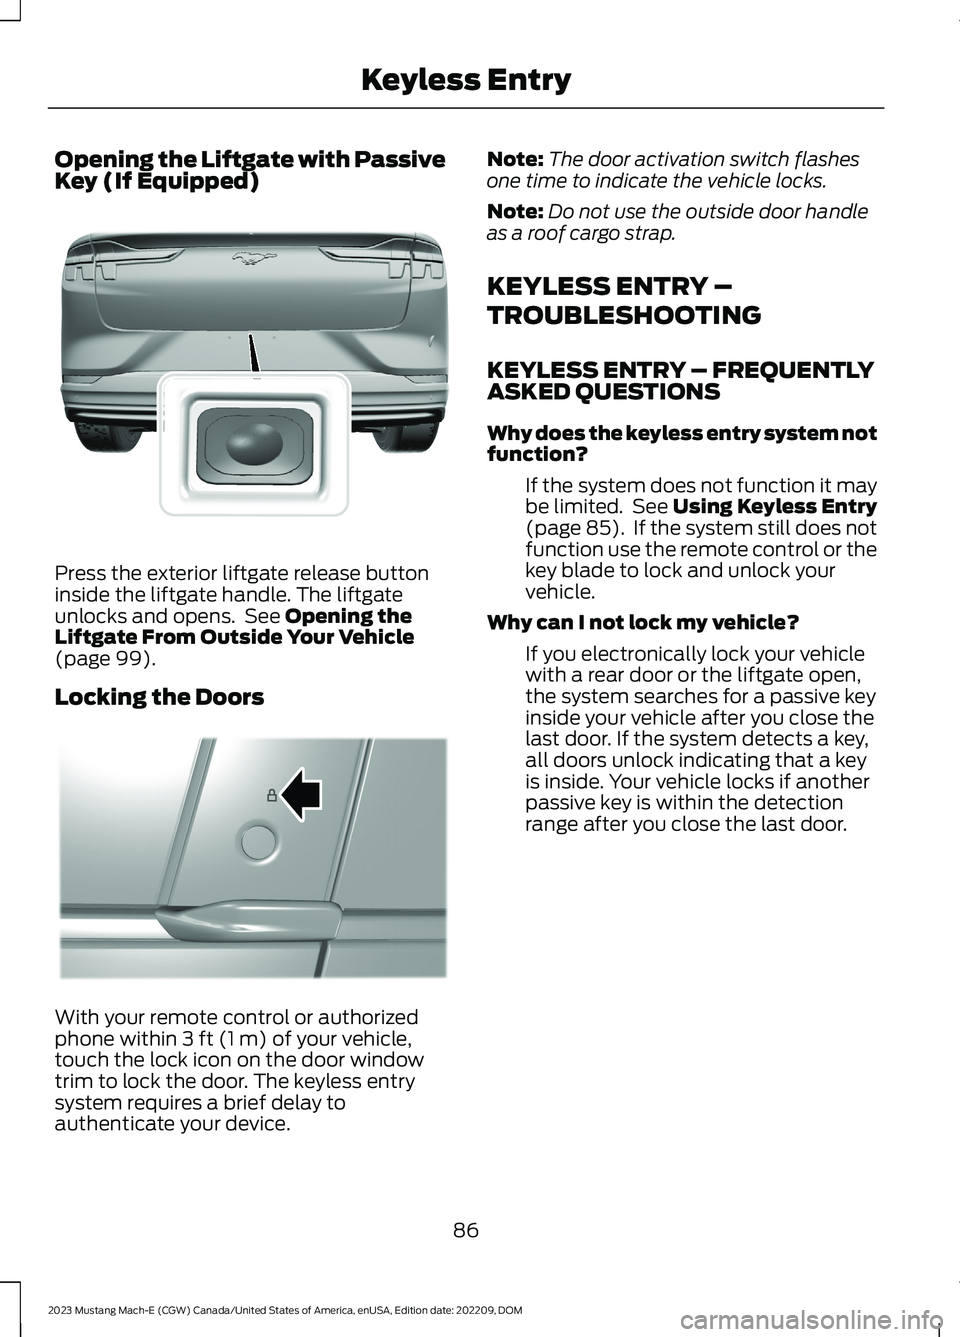 FORD MUSTANG MACH E 2023  Owners Manual Opening the Liftgate with PassiveKey (If Equipped)
Press the exterior liftgate release buttoninside the liftgate handle. The liftgateunlocks and opens. See Opening theLiftgate From Outside Your Vehicl